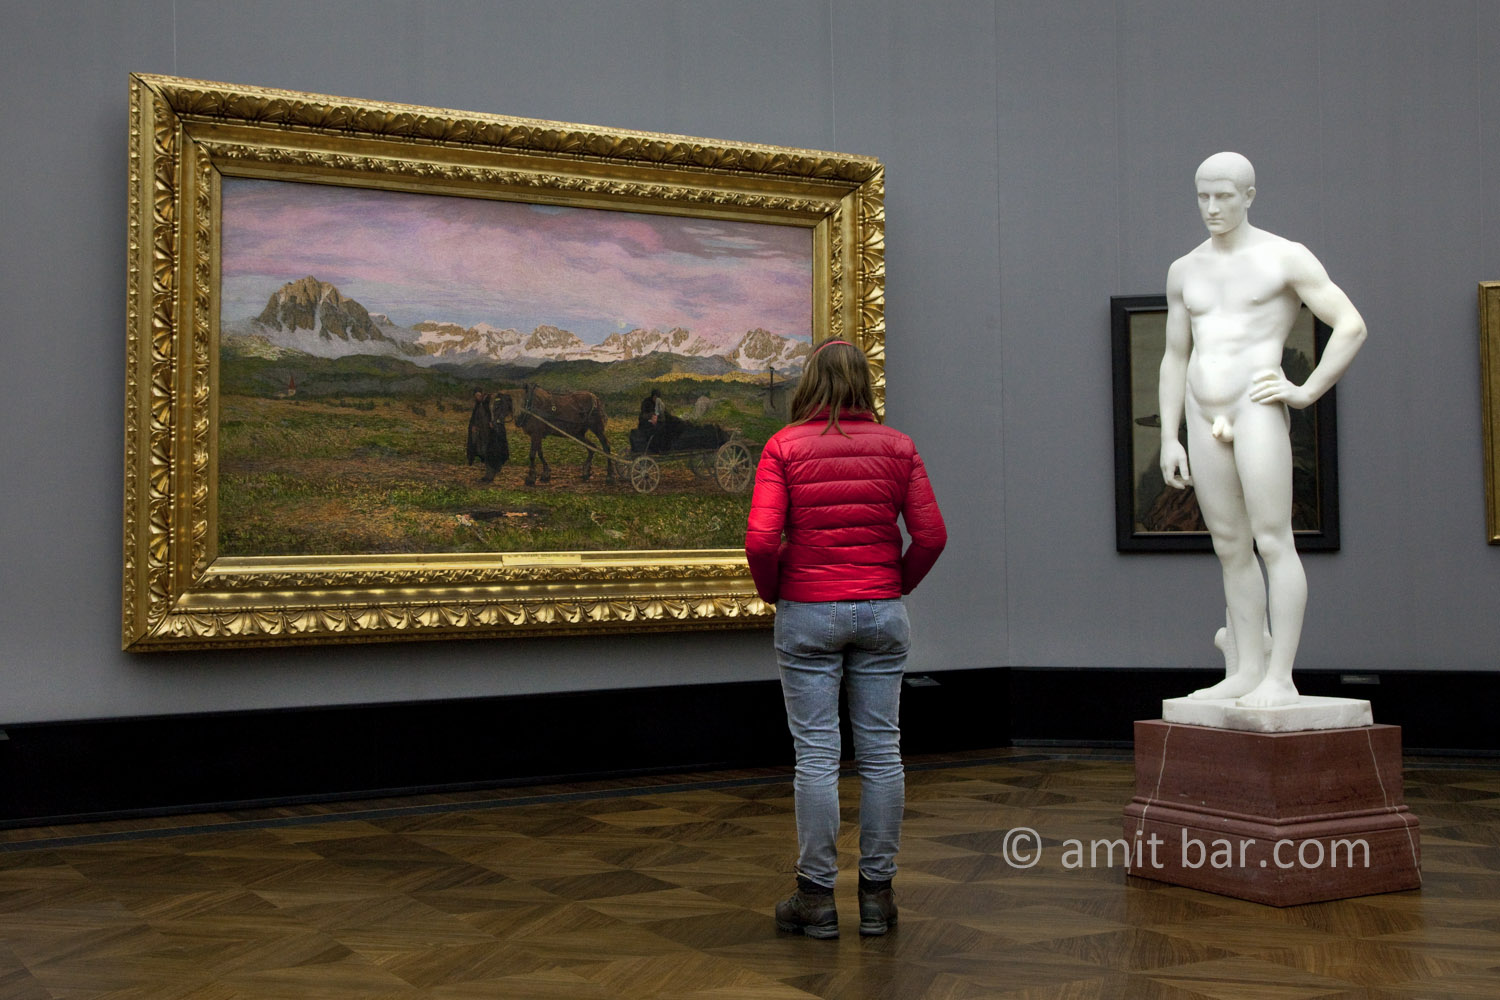 Berlin: Thinking. 
A visitor at the museum, Alte Nationalgalerie